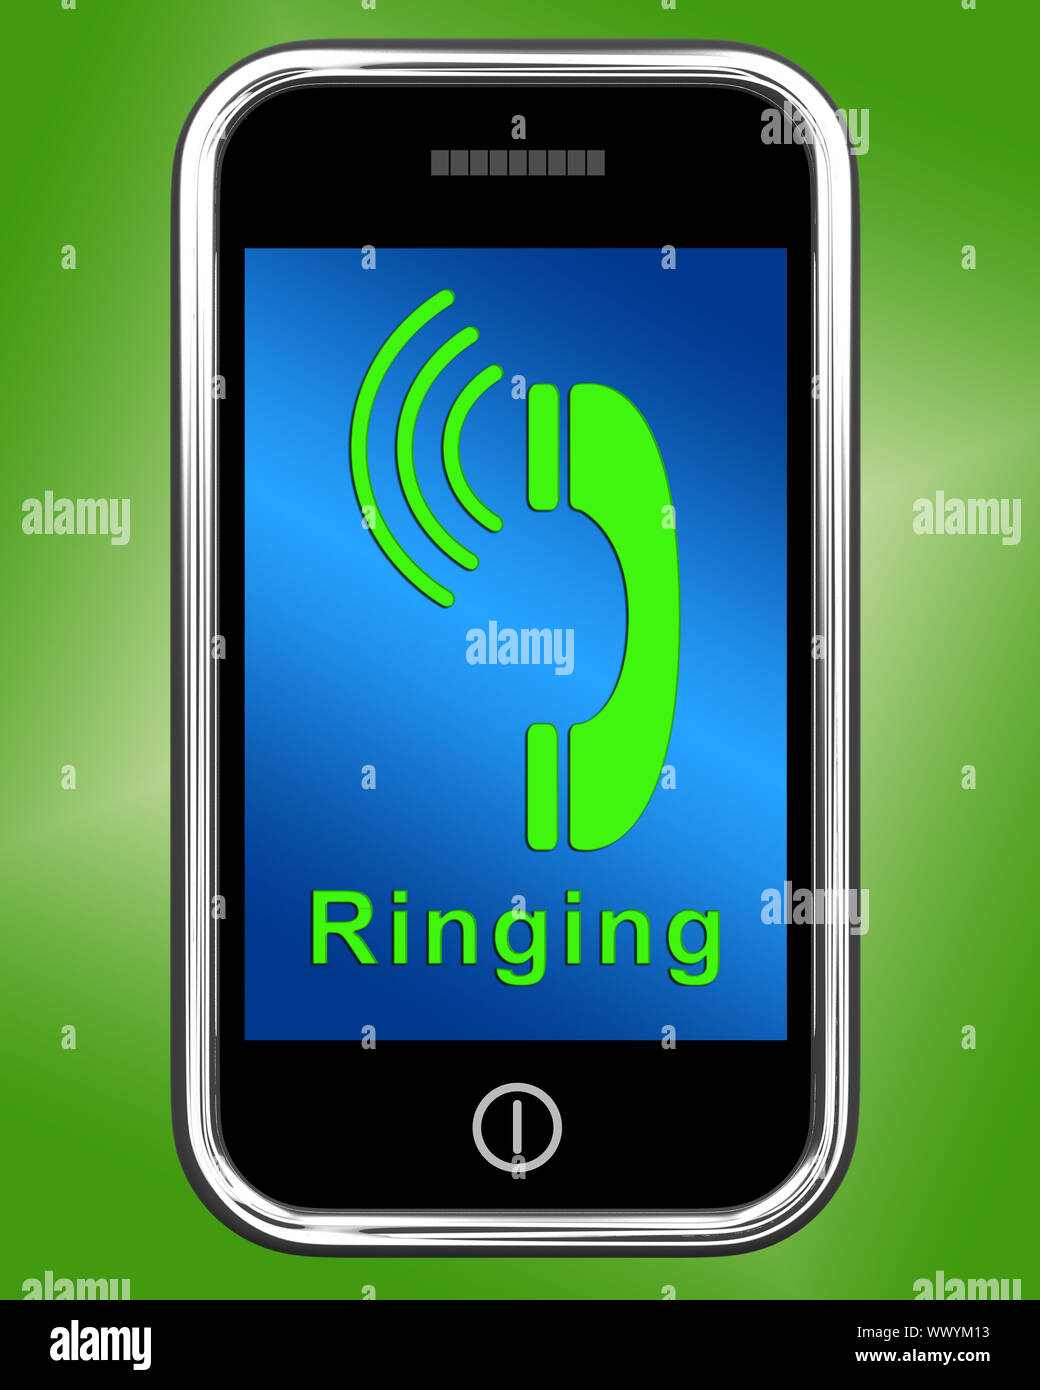 Ringing Icon On Mobile Phone Showing Smartphone Call Stock Photo - Alamy